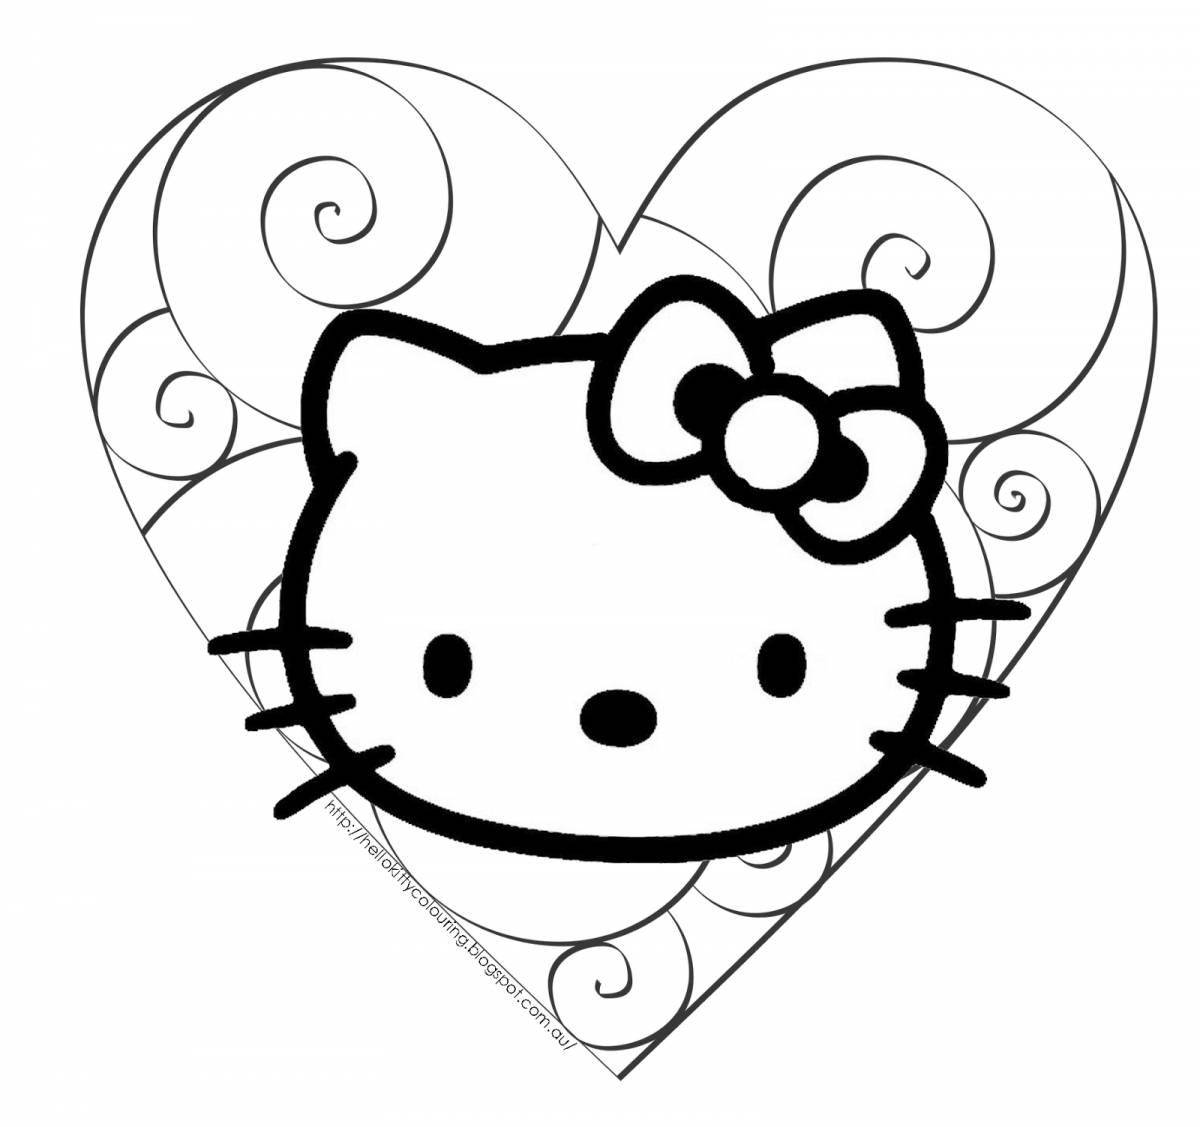 Great hello kitty coloring book